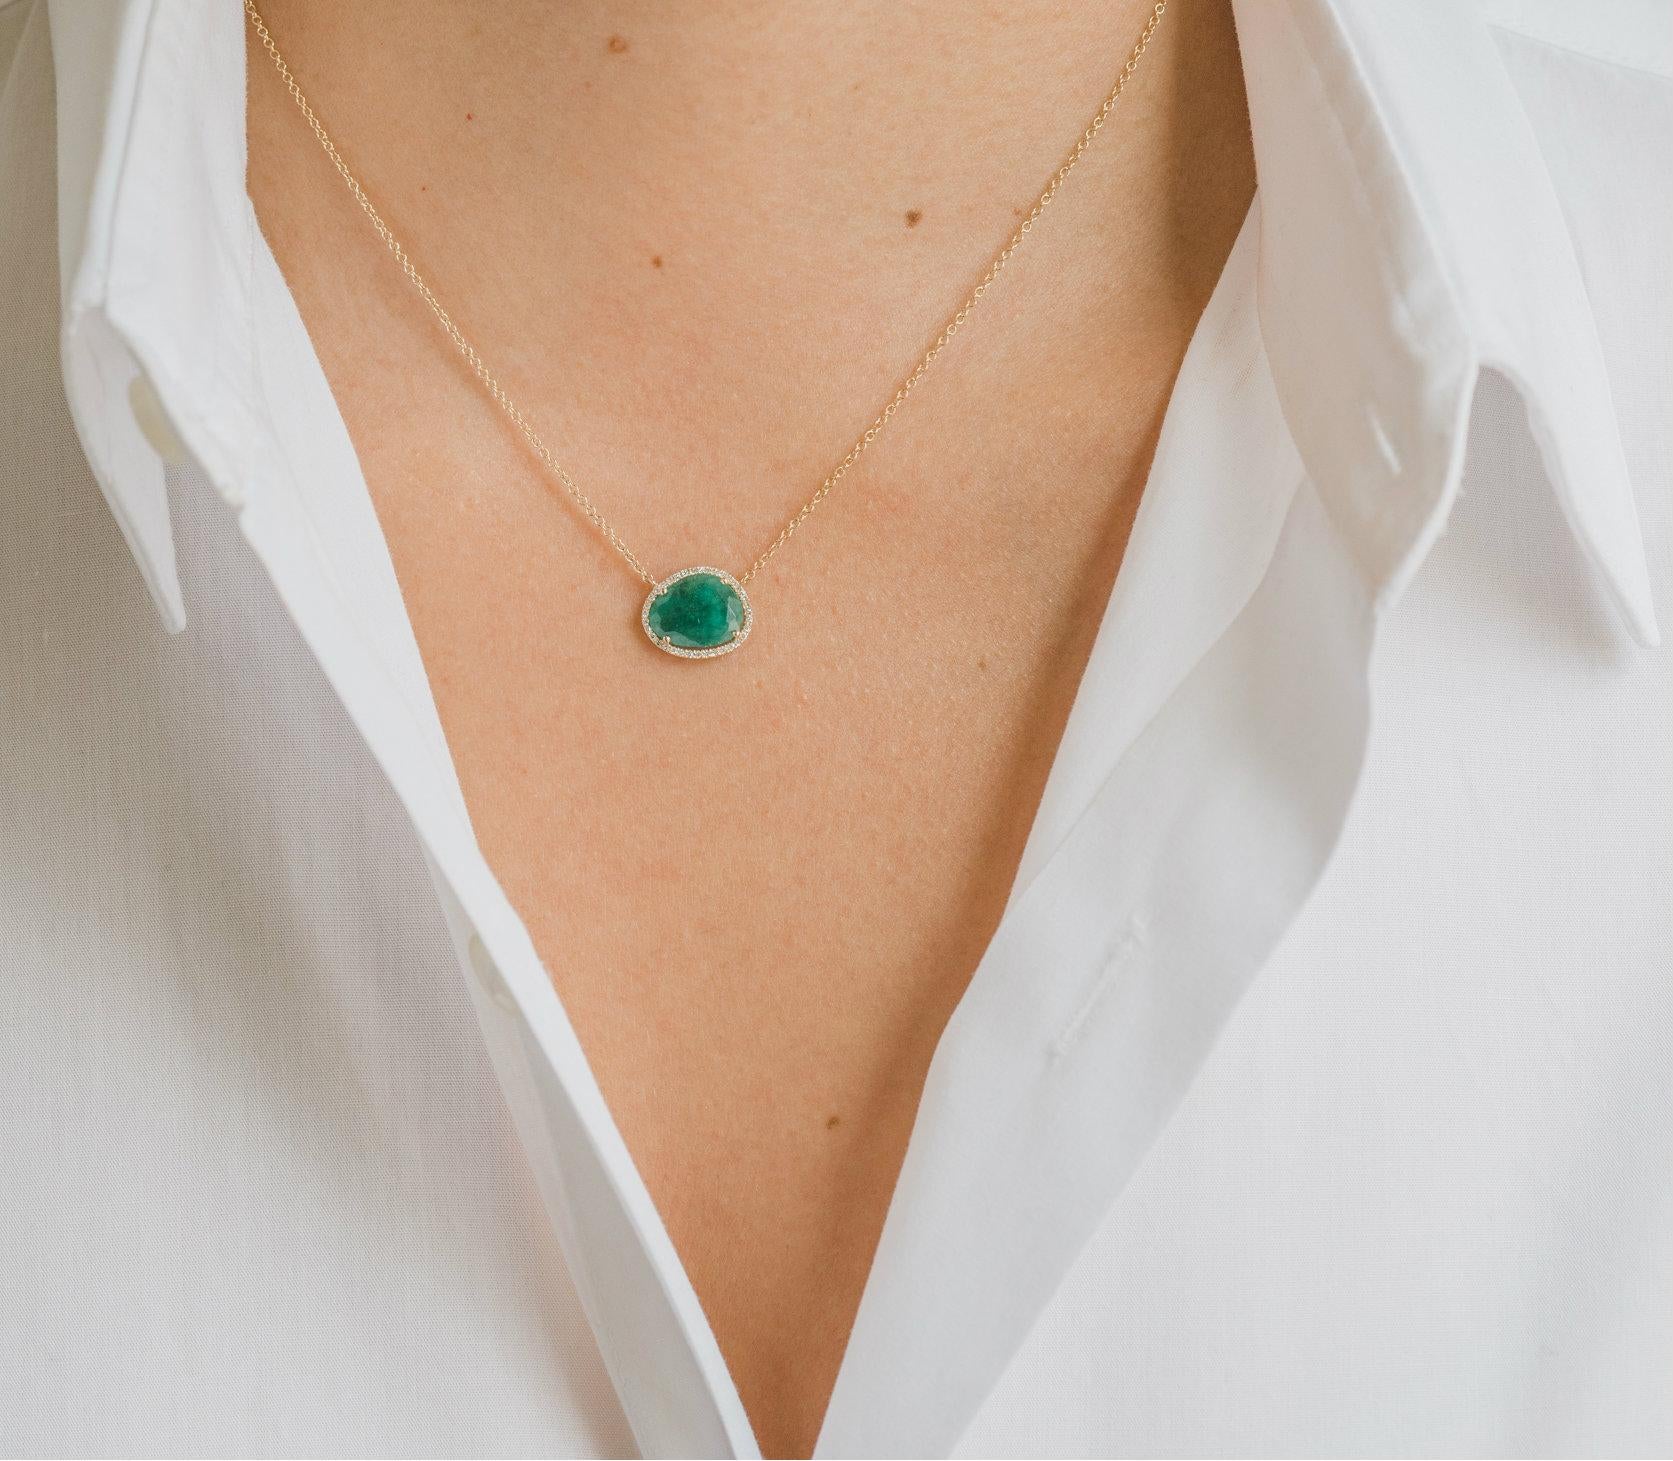 14k solid gold, pave diamond, and a beautifully handpicked free form emerald, available in yellow gold hanging from a 16''-18'' adjustable chain. Timeless and perfectly handcrafted, wear it up or down, by itself or layered.

Size of emerald: Approx.